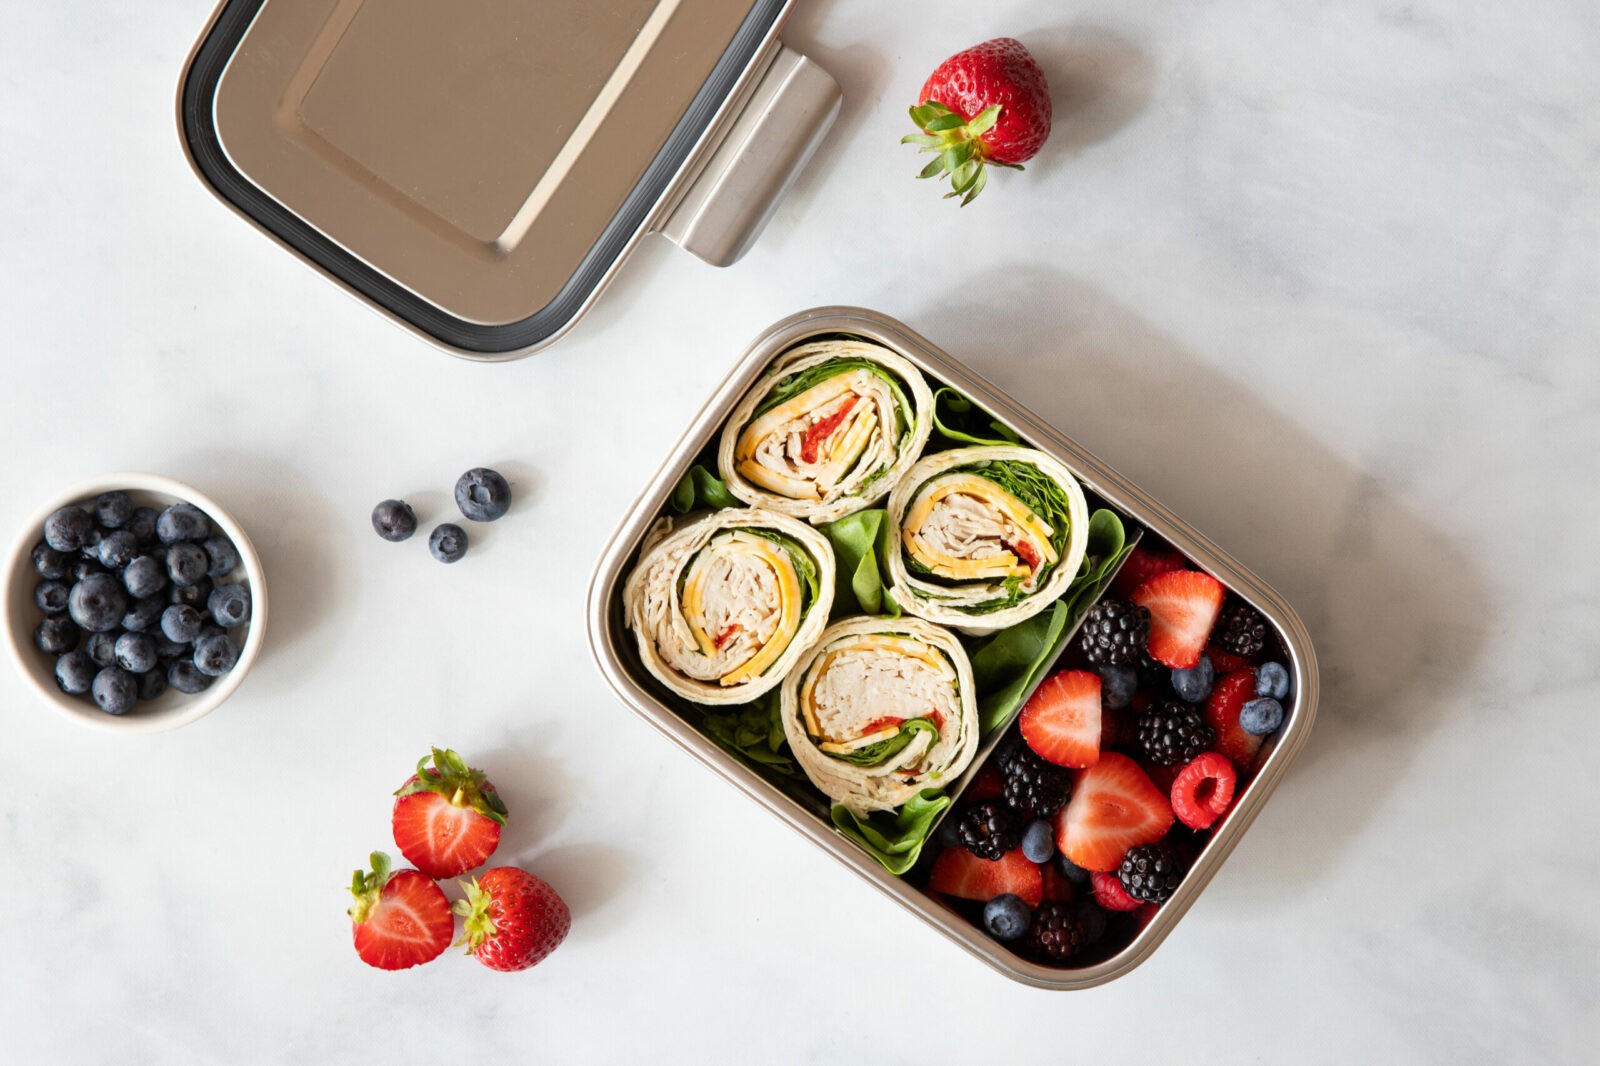 Thermos - This is lunchtime, solved. Pack lunches that you'll love